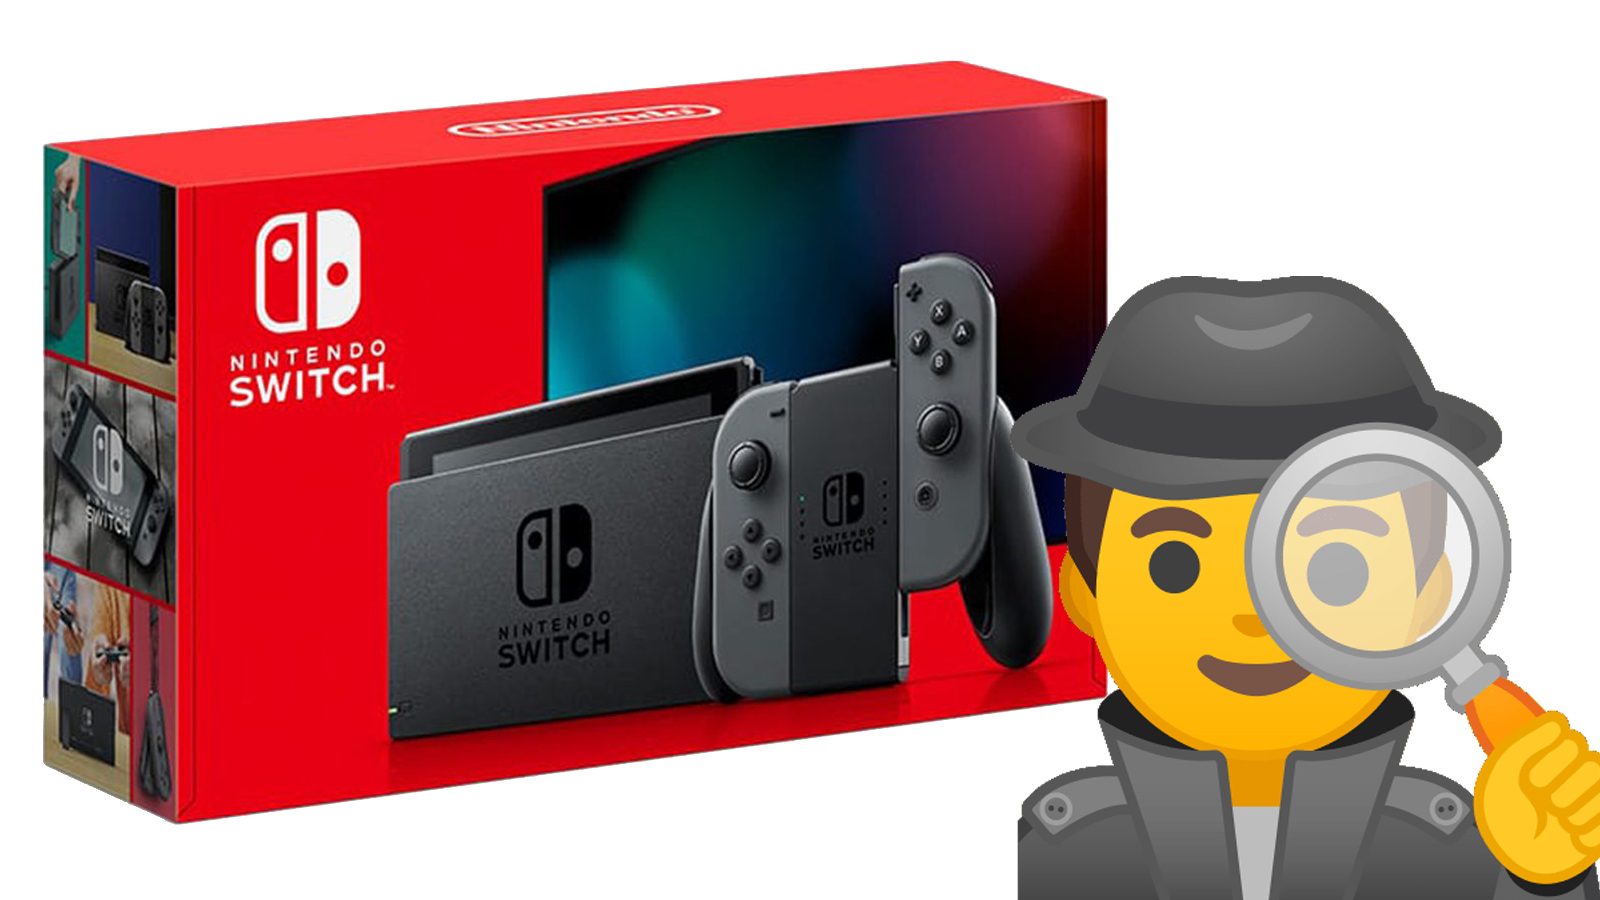 Nintendo Switch's secret upgrade: how to spot if YOU have the new 